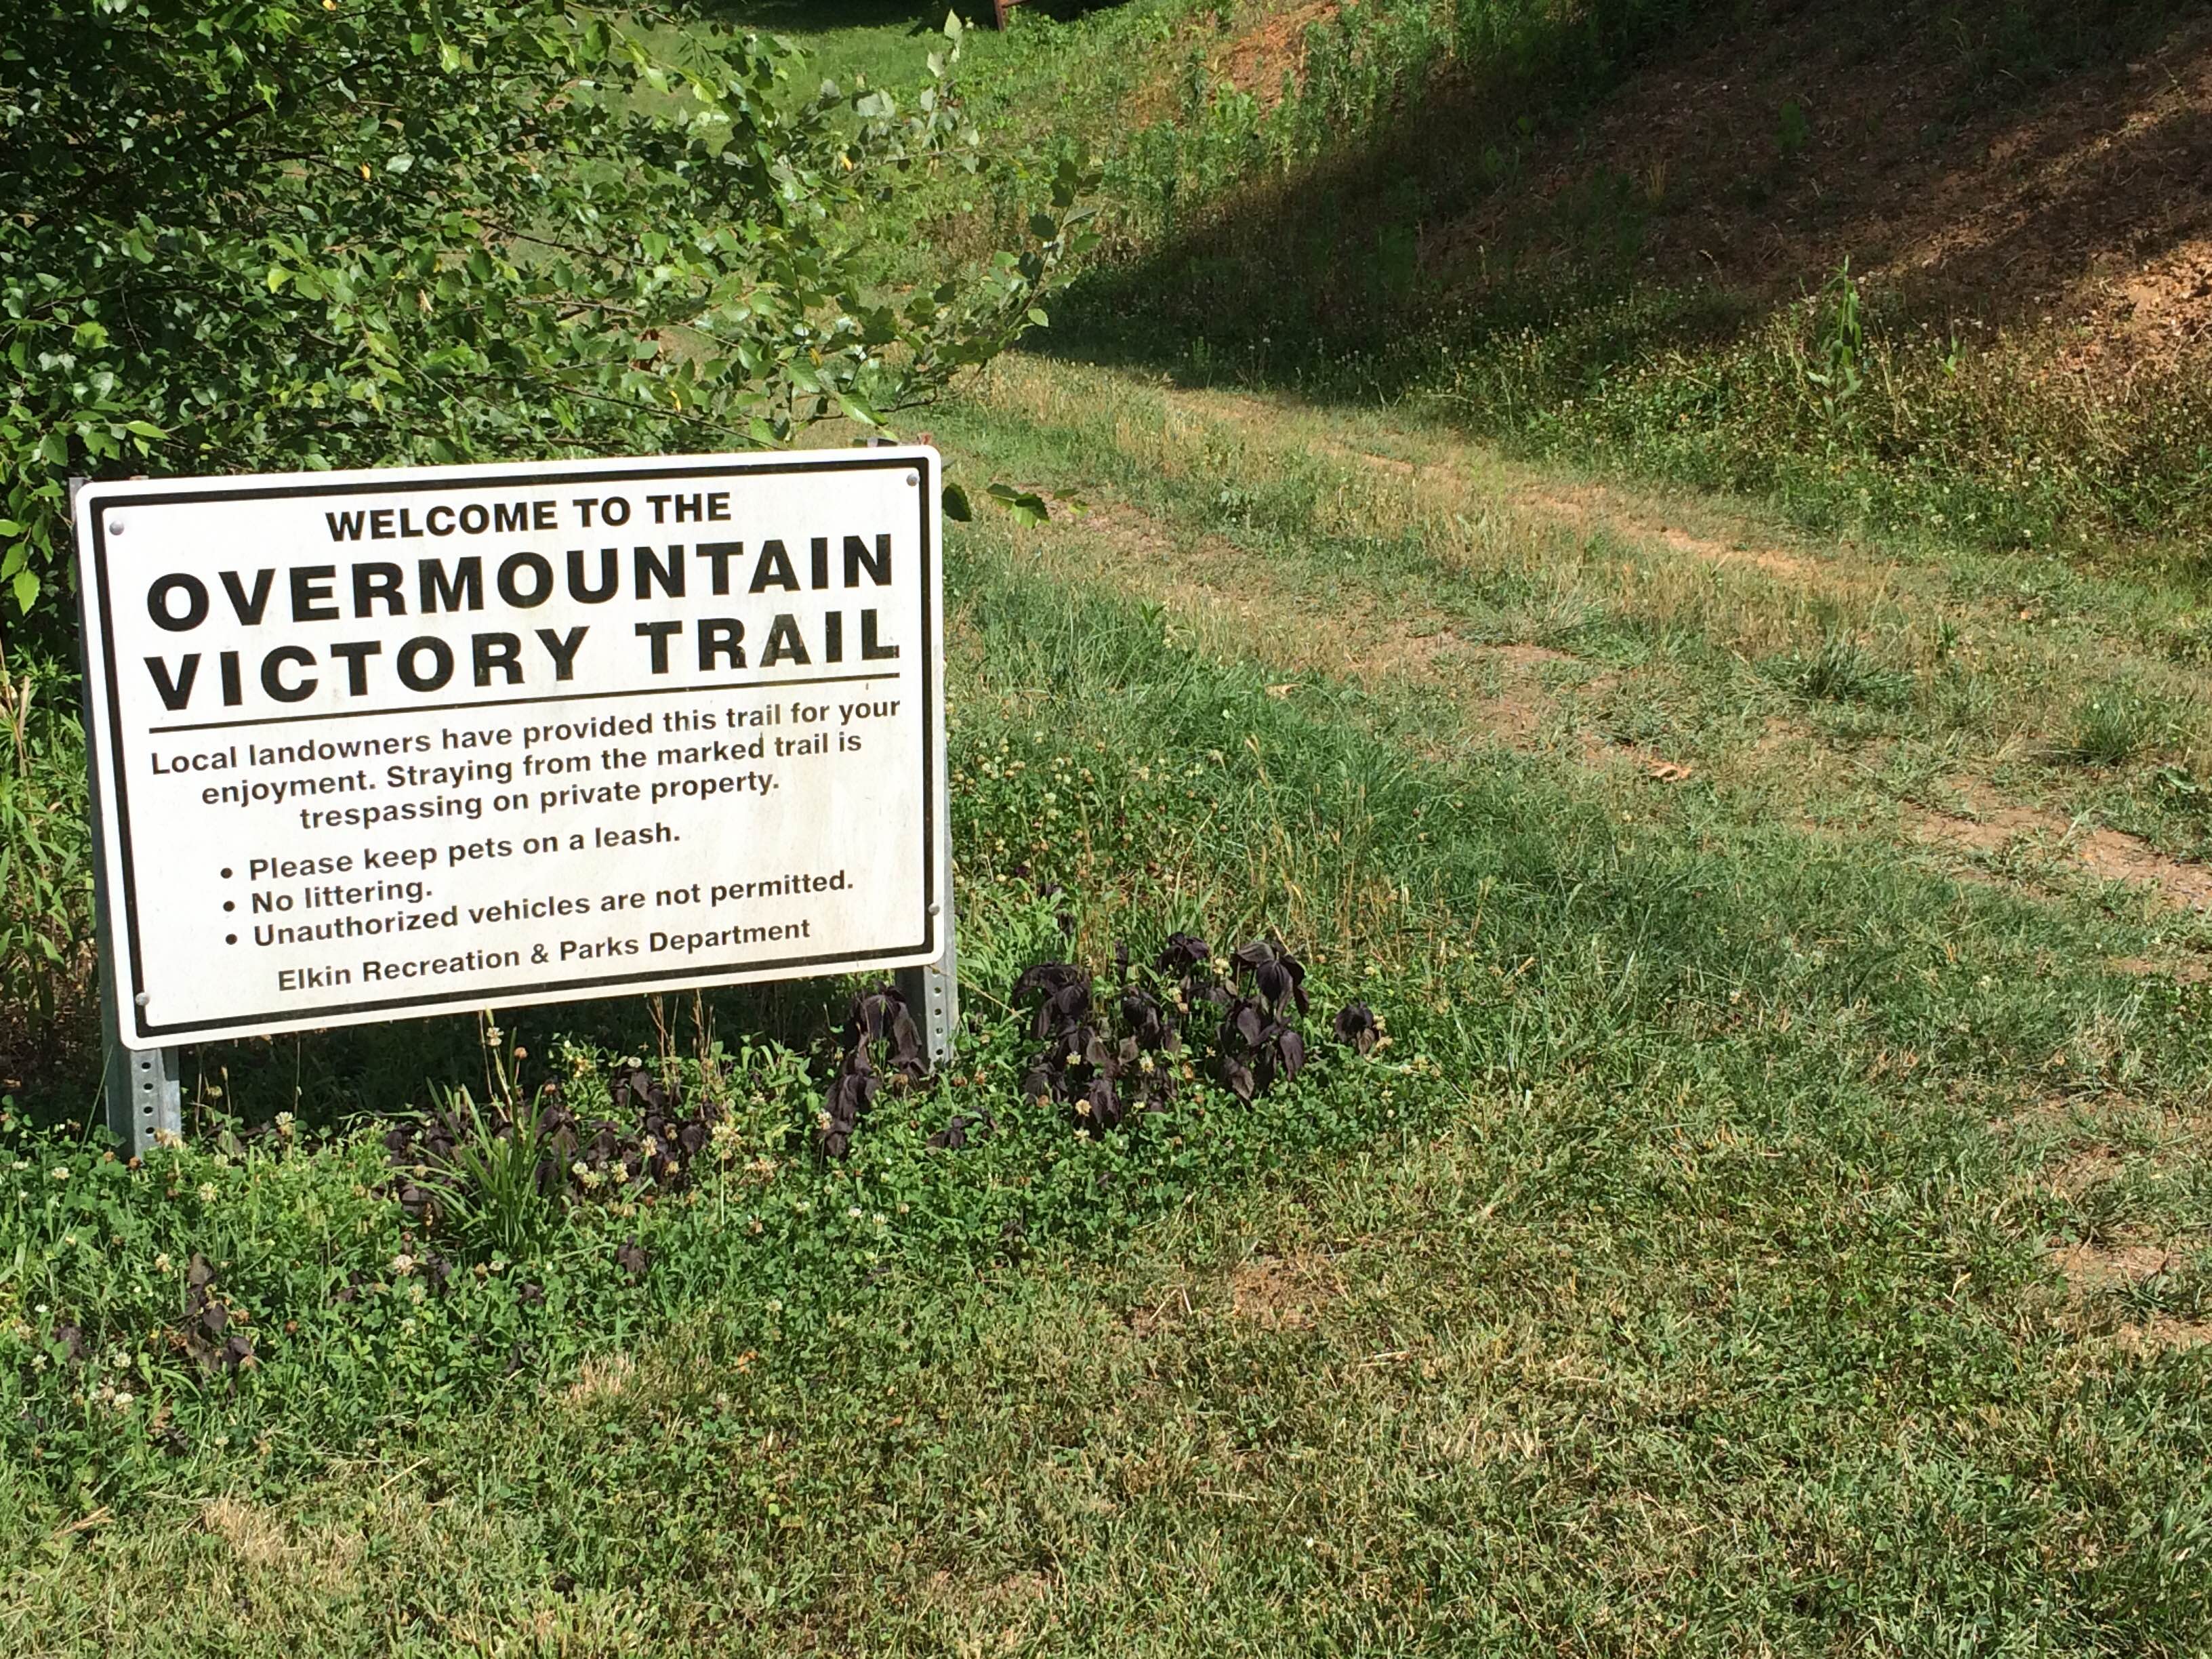 A sign on the Overmountain Victory Trail at Elkin reminds visitors not to stray off the trail.